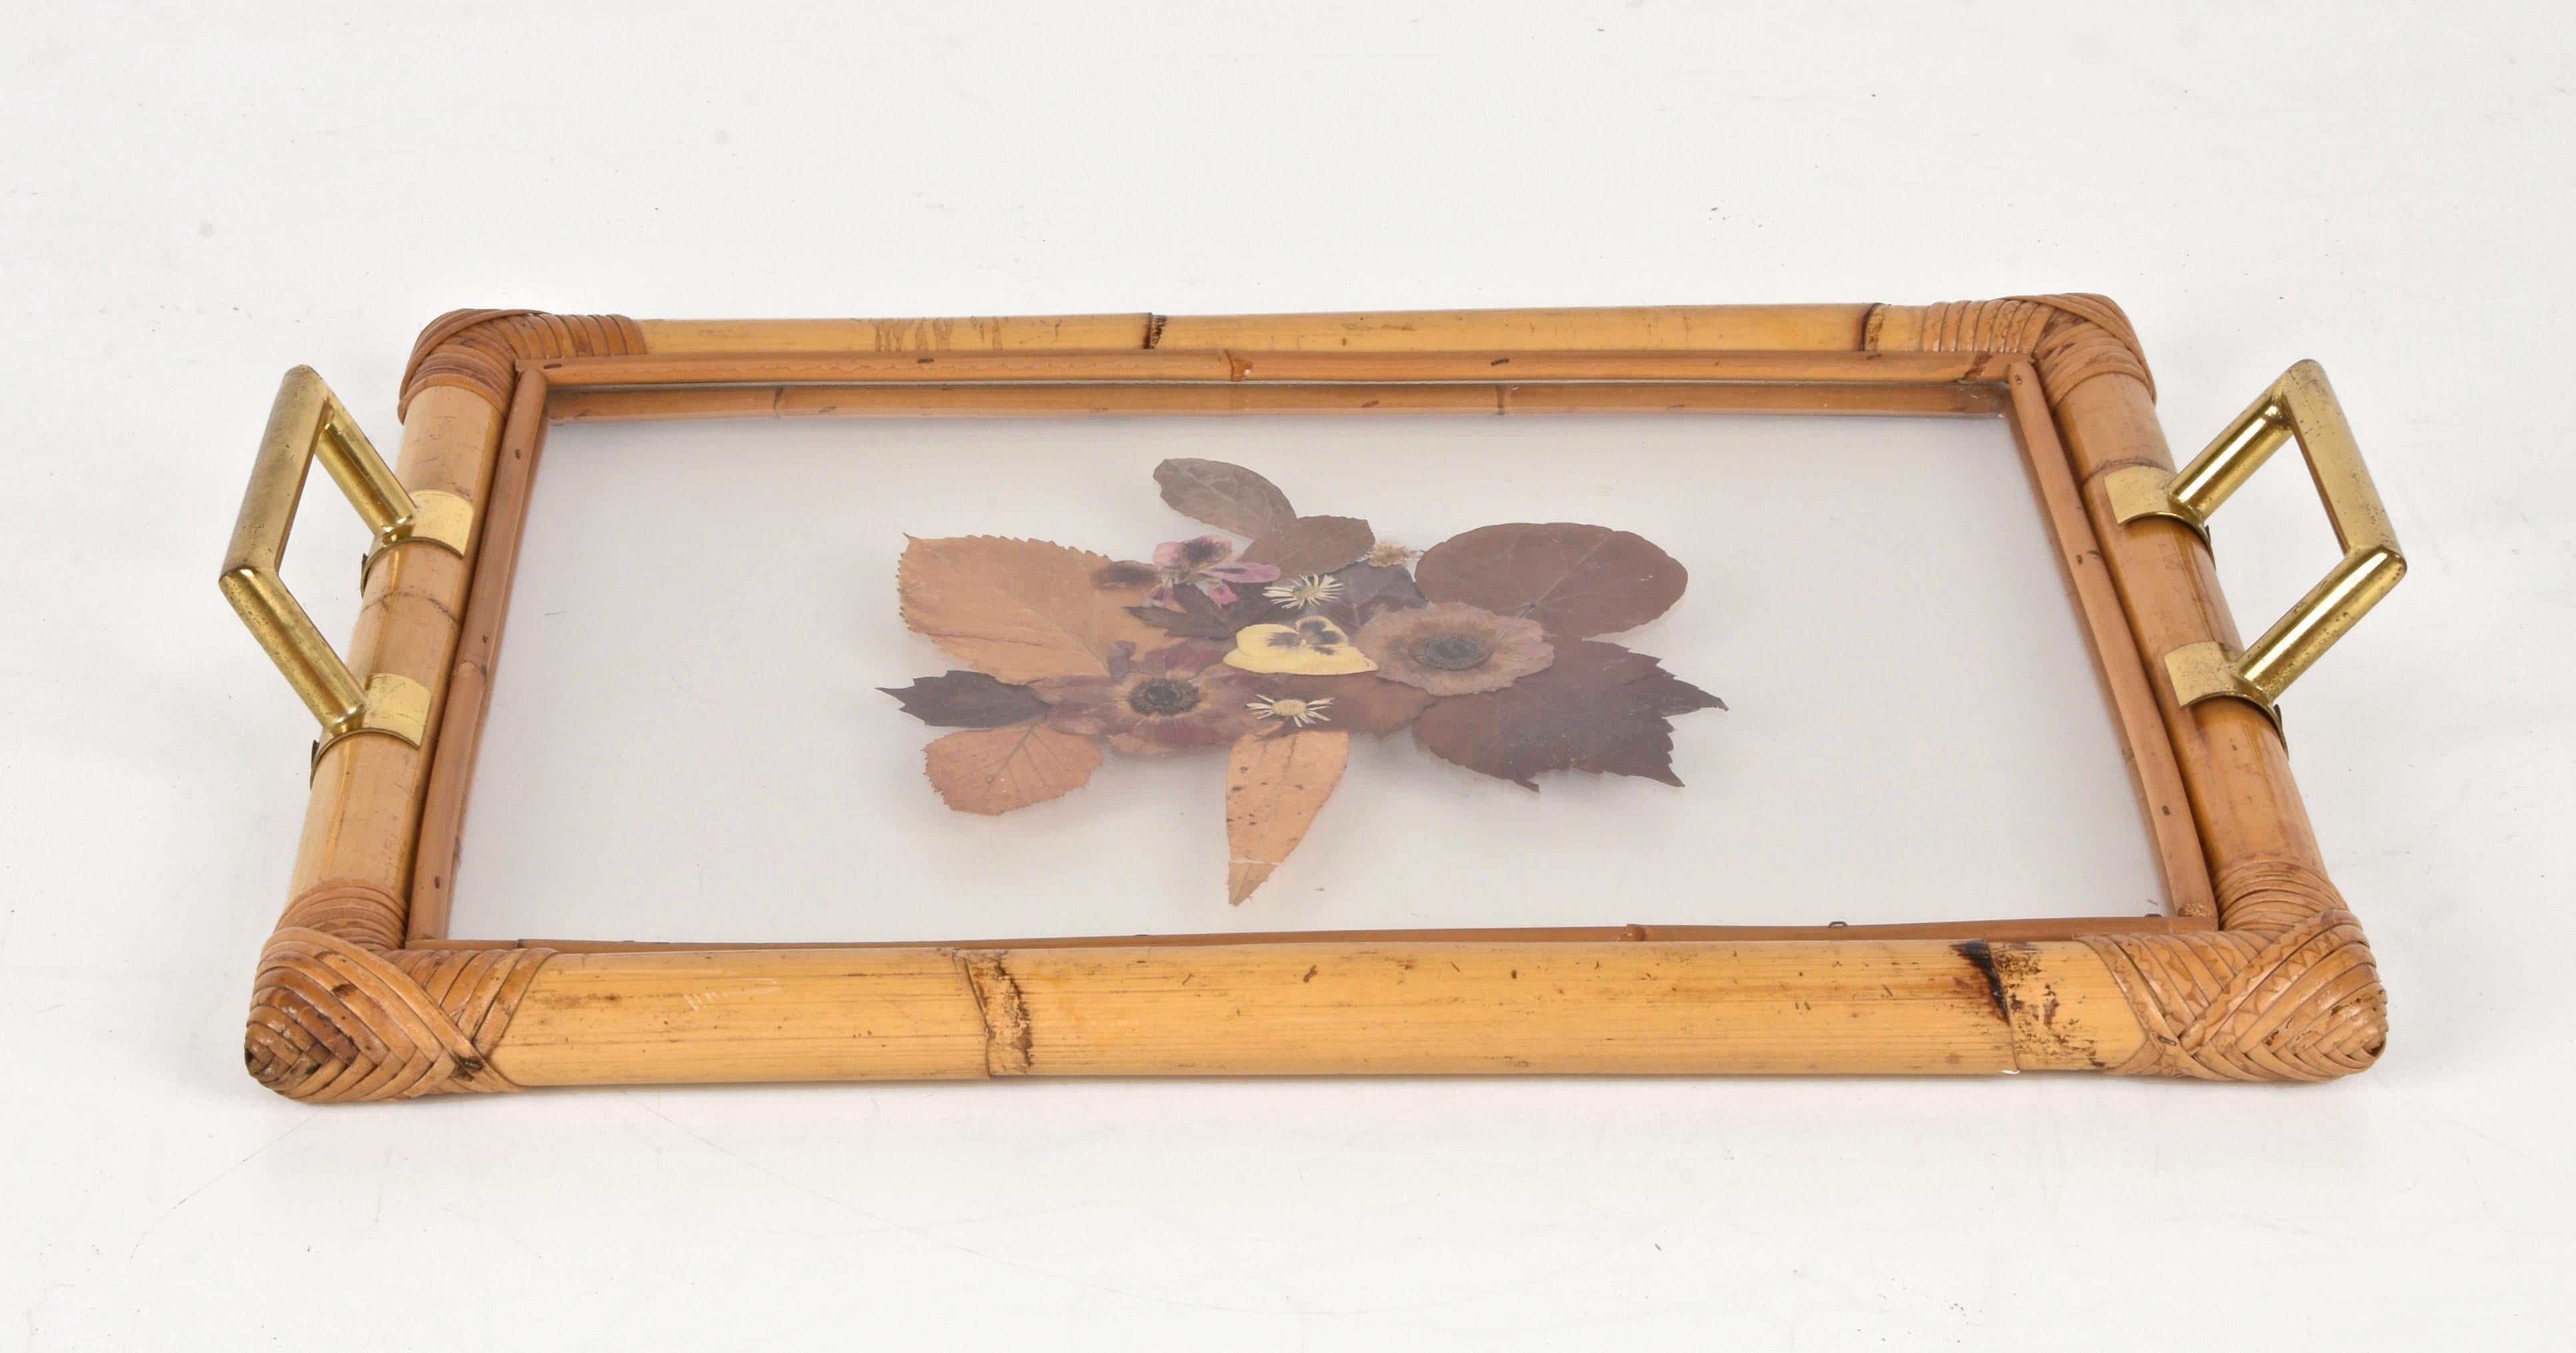 Serving tray in bamboo, lucite and golden brass handles entirely handmade with a wonderful bouquet of flowers. This fantastic item was produced in Italy during the 1970s.

The materials and the uses of biological elements (bamboo and flowers) are